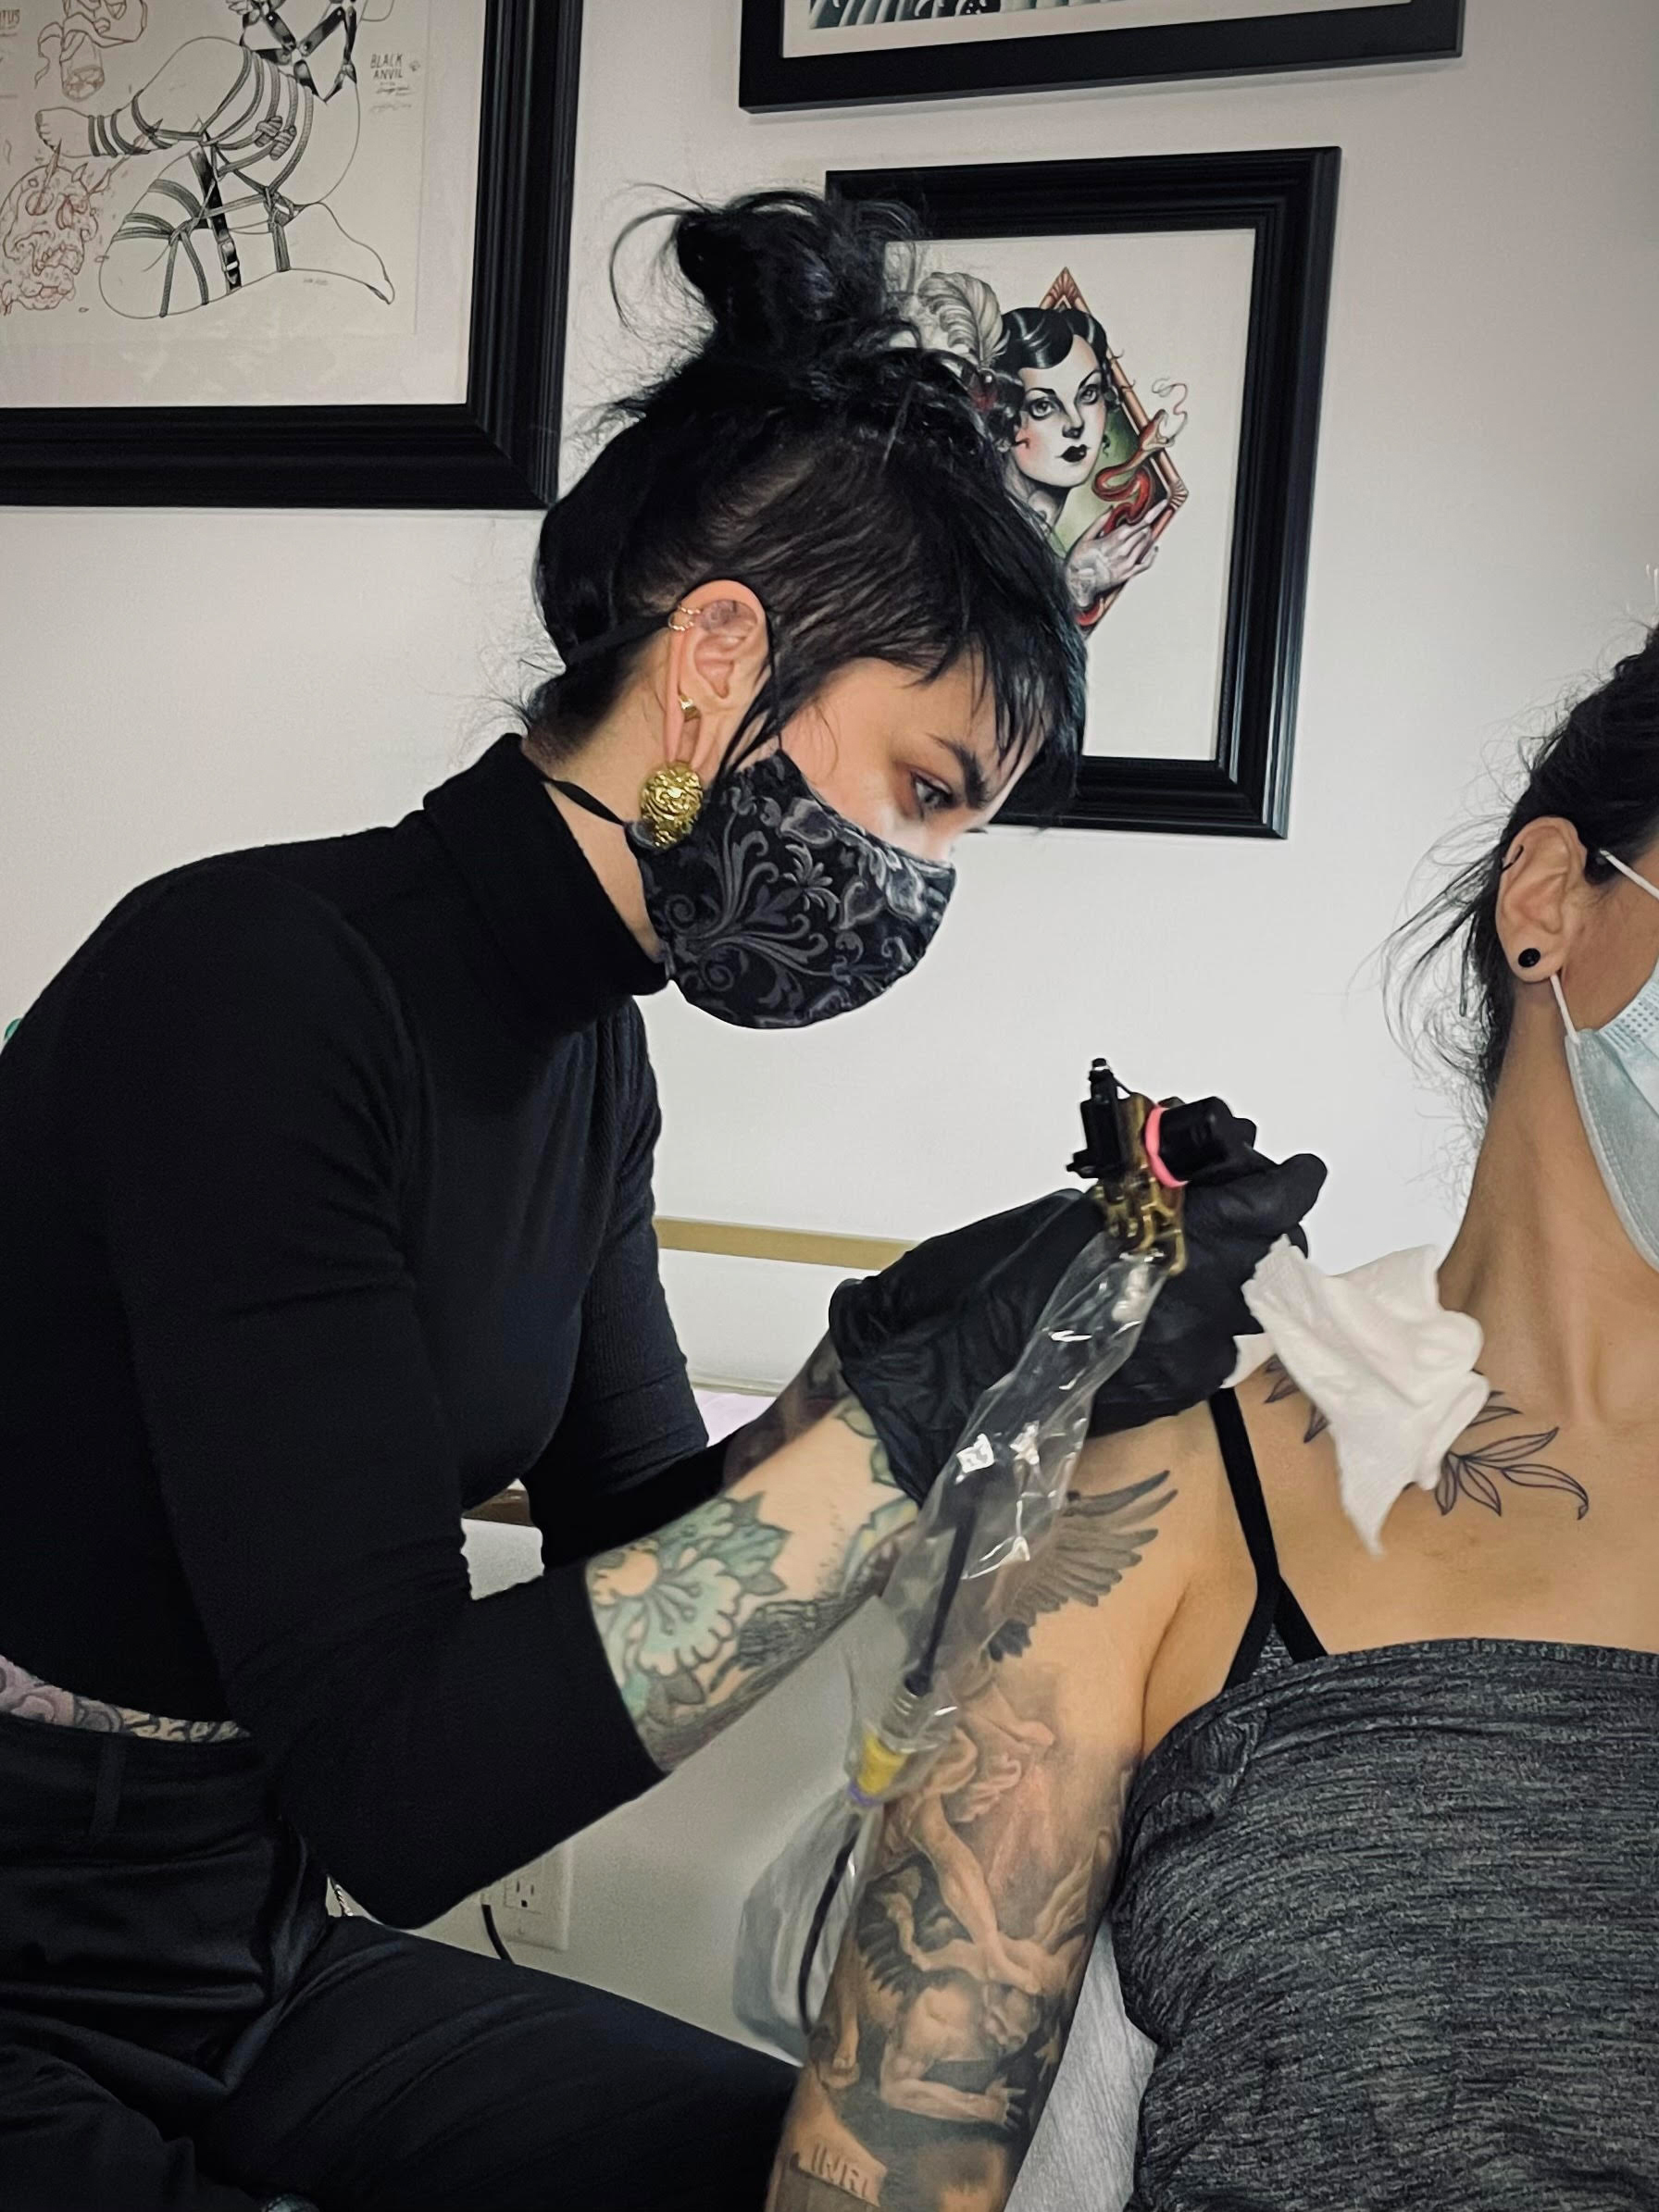 Supporting women in the tattoo industry￼ – The Carillon